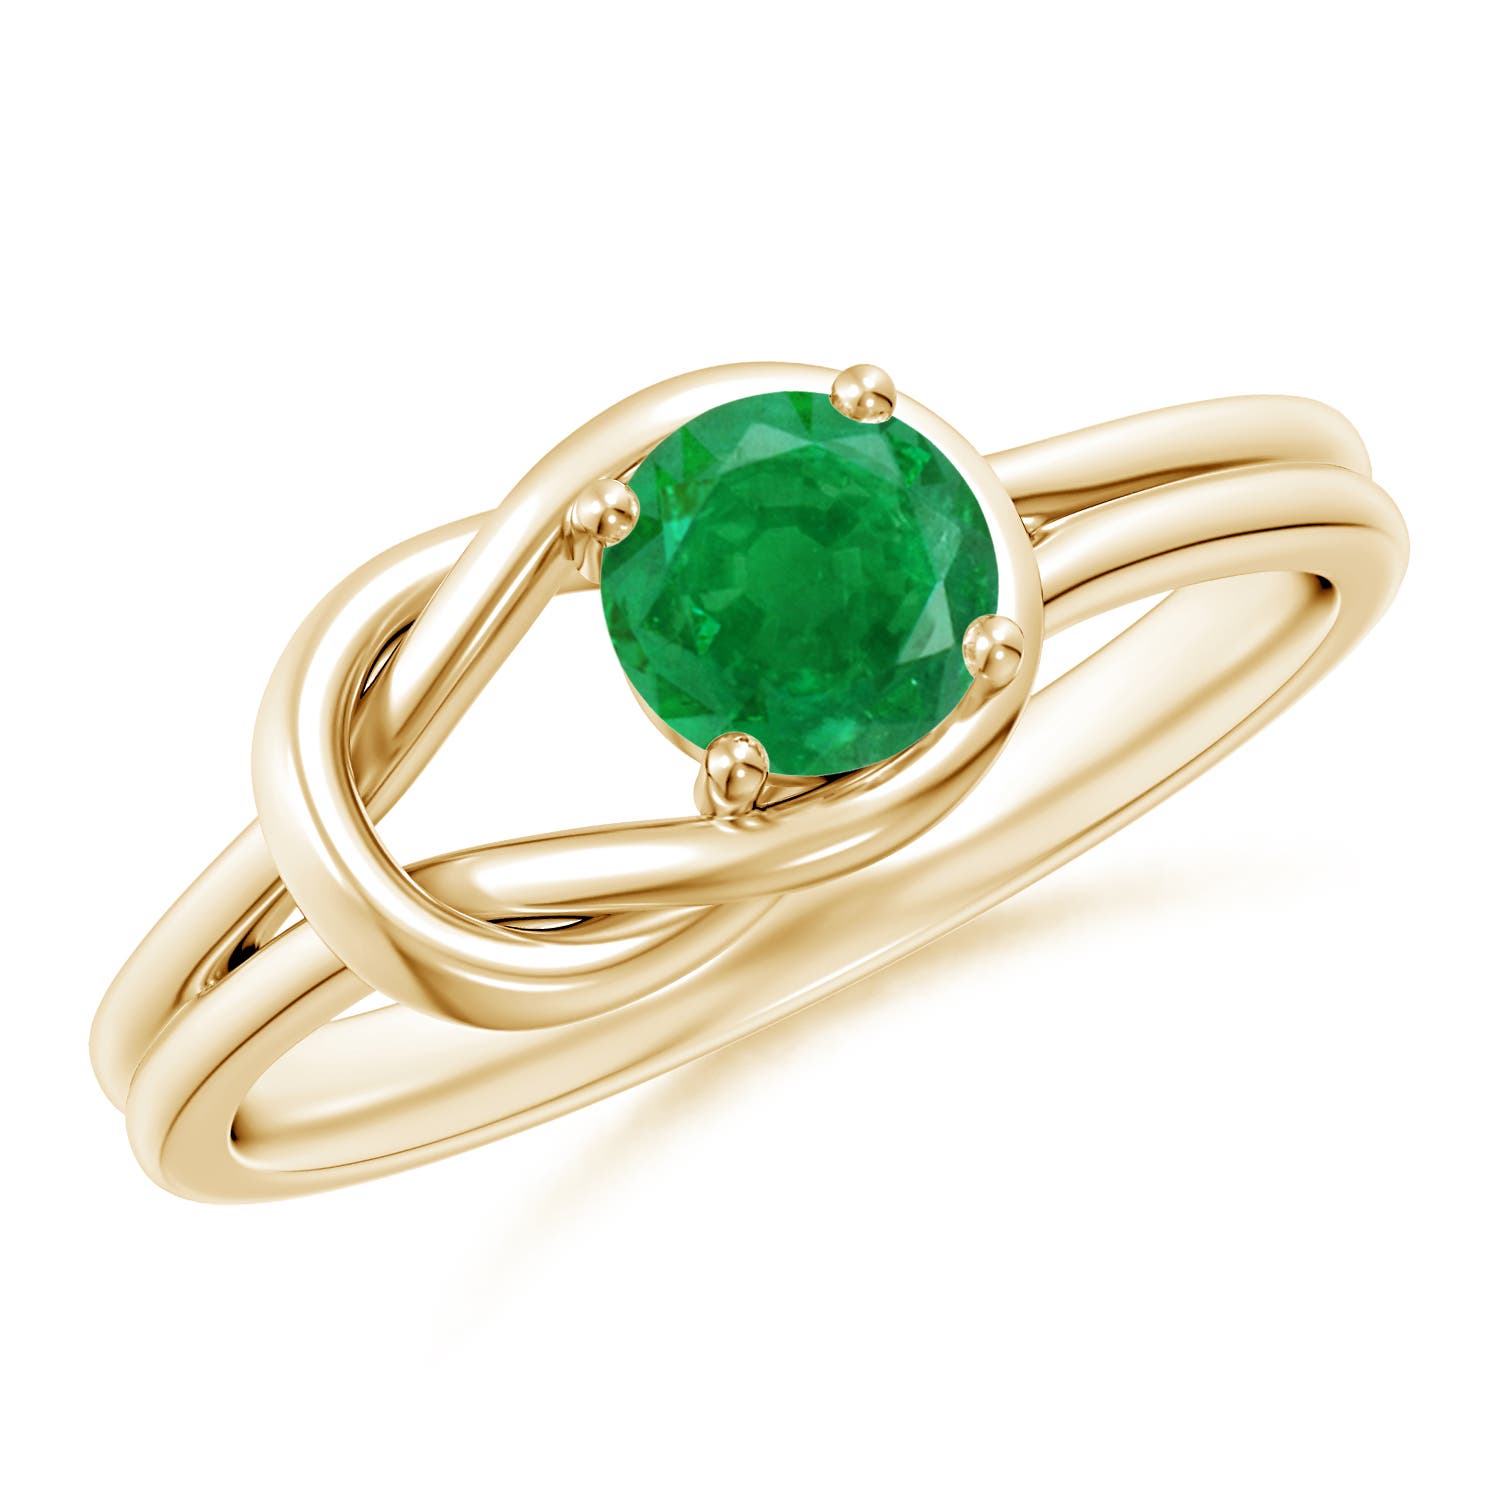 AA - Emerald / 0.45 CT / 14 KT Yellow Gold